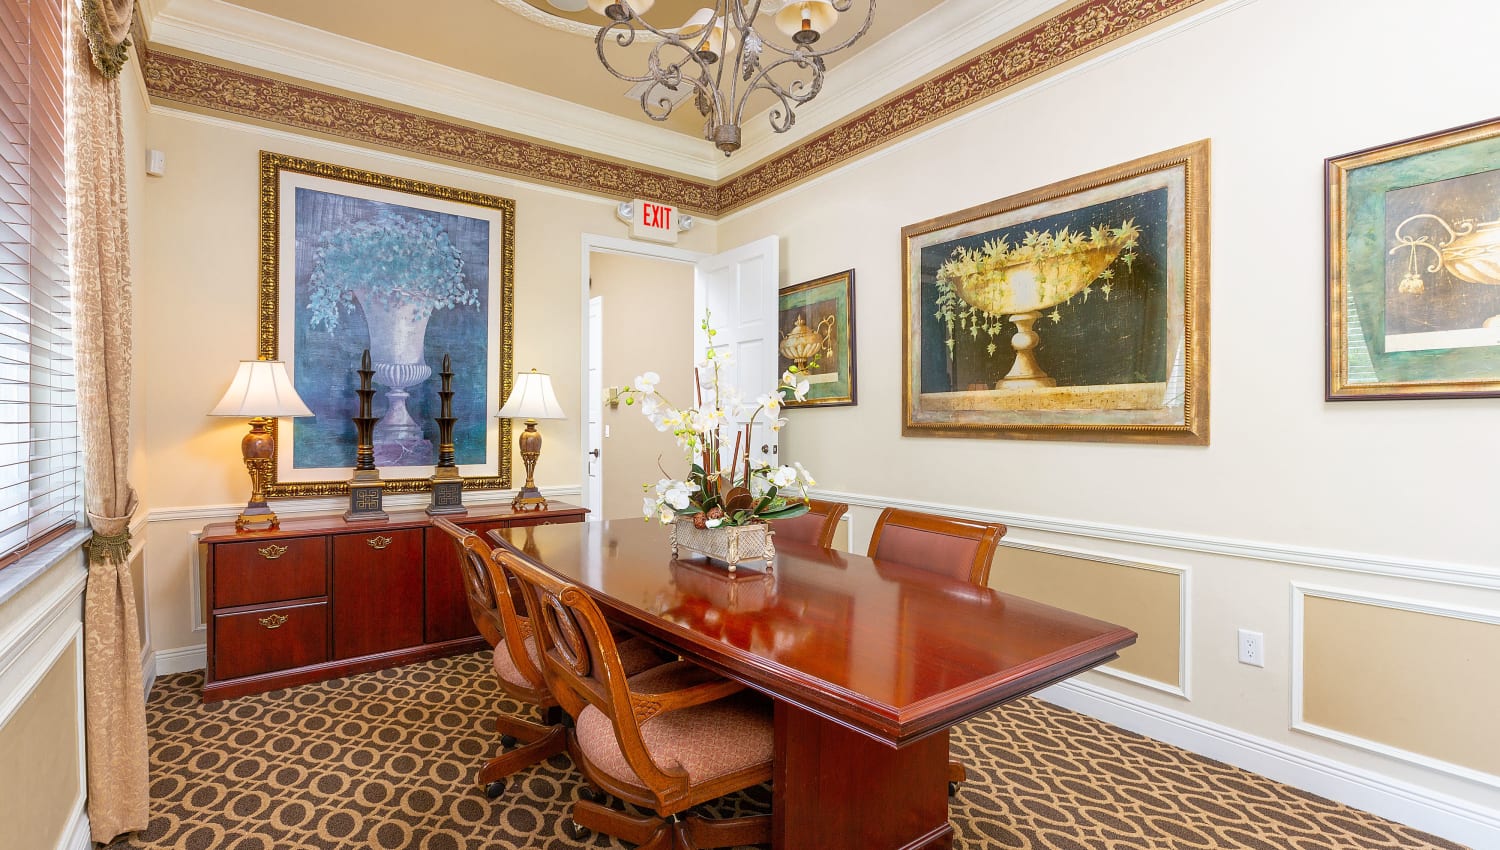 Conference room at Ibis Reserve Apartments in West Palm Beach, Florida